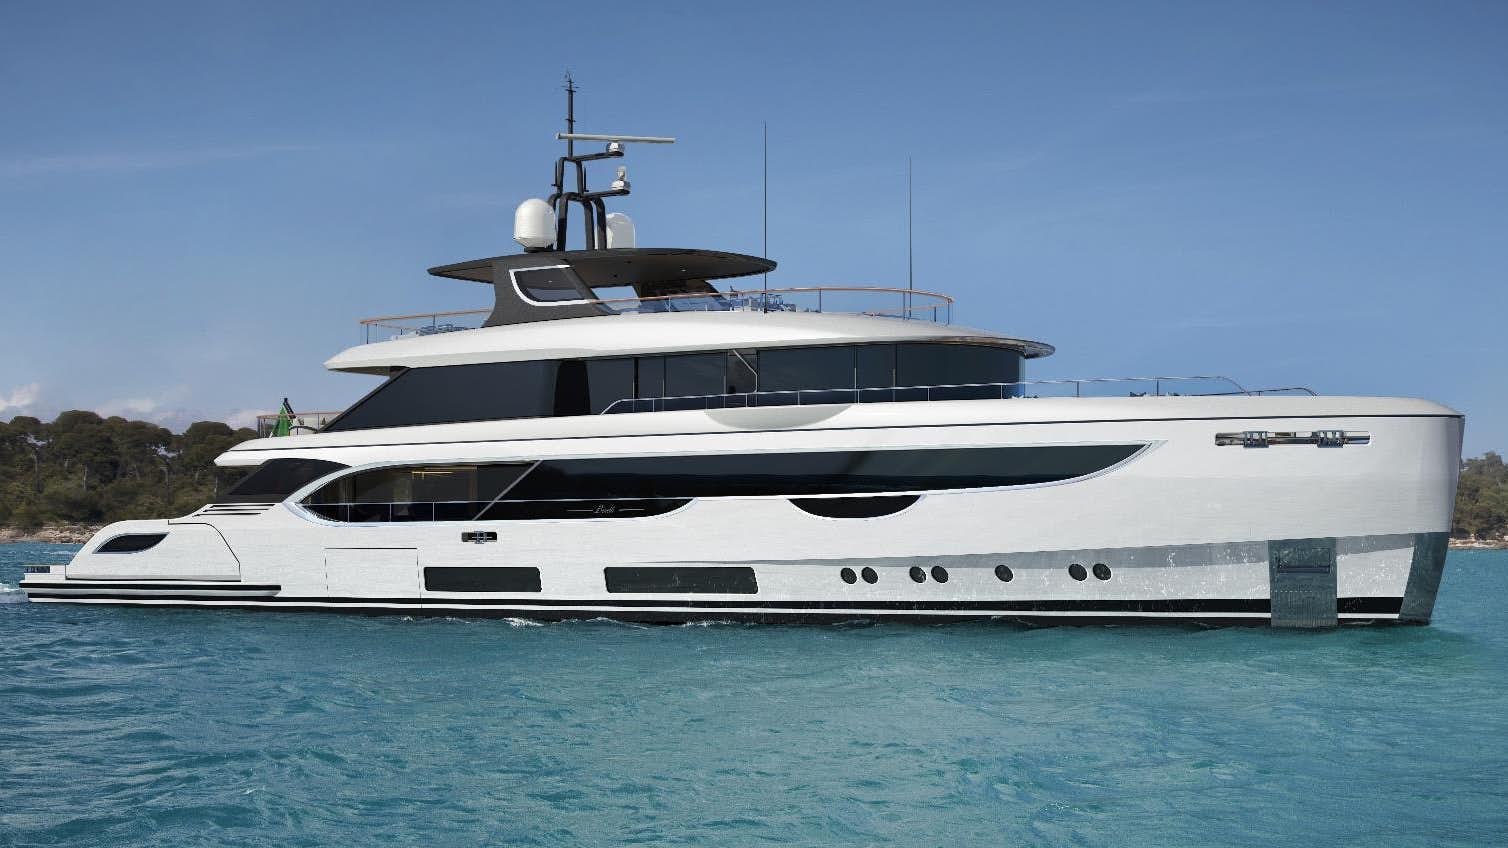 Charter superyacht ALPHA WAVES with Northrop & Johnson for 150k/week